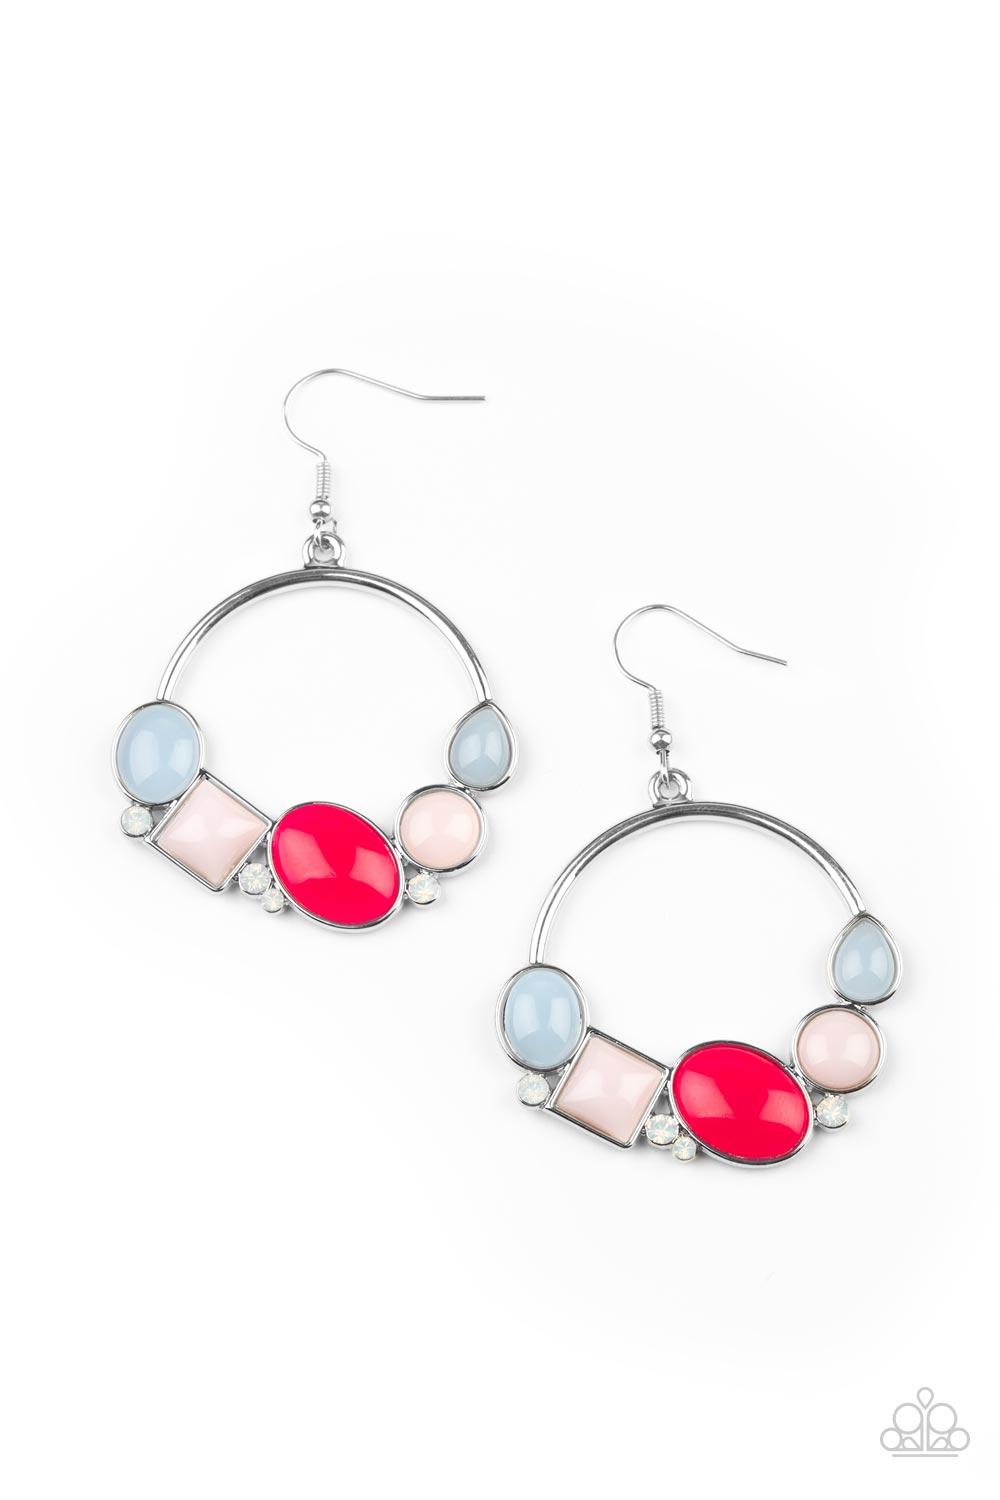 Beautifully Bubblicious Multi Earring - Paparazzi Accessories  Dainty opalescent white rhinestones are sprinkled between mismatched dewy Cerulean, pink, and Raspberry Sorbet beads along the bottom of a silver hoop, creating a bubbly pop of color. Earring attaches to a standard fishhook fitting.  All Paparazzi Accessories are lead free and nickel free!  Sold as one pair of earrings.